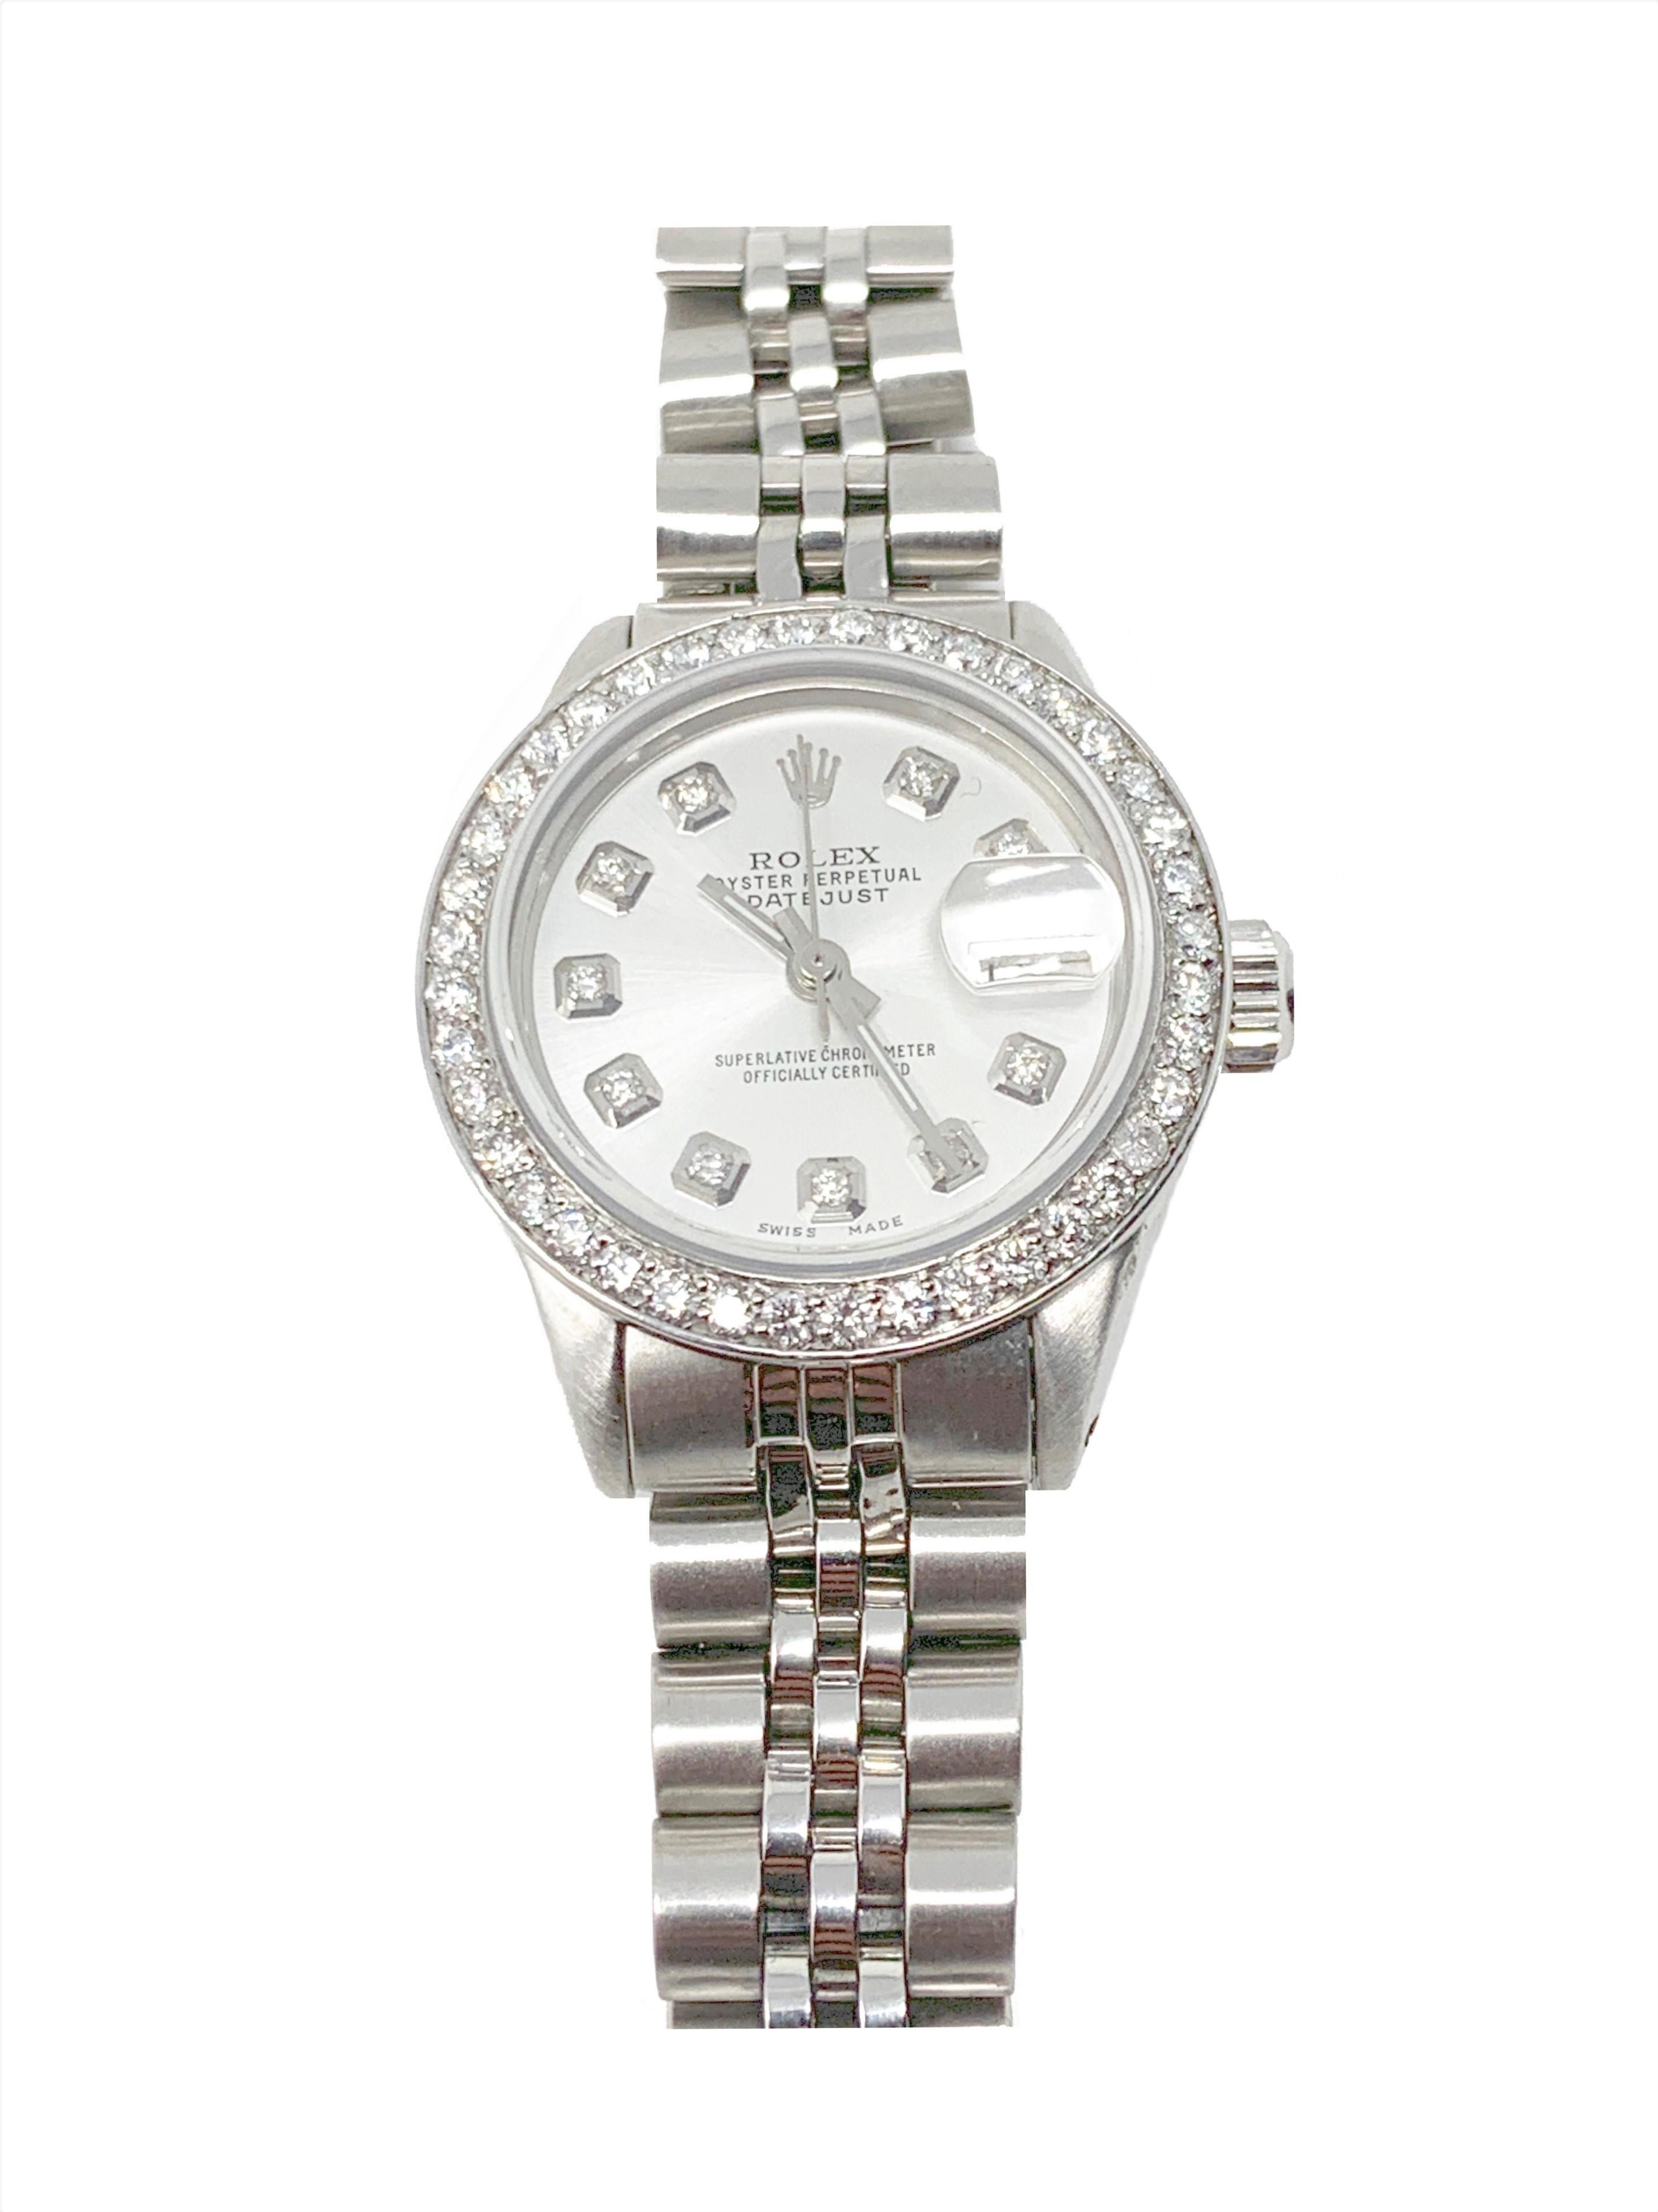 Brand - Rolex 
Model - 6919
Gender -Ladies 
Case Size - 26MM
Beze - Steel Diamond
Dial - Refinished Silver diamond 
Crystal - Sapphire
Movement - Automatic Rolex Cal.2030
Band - Steel Jubilee

Two Year In House Warranty 
New Generic Watch Box